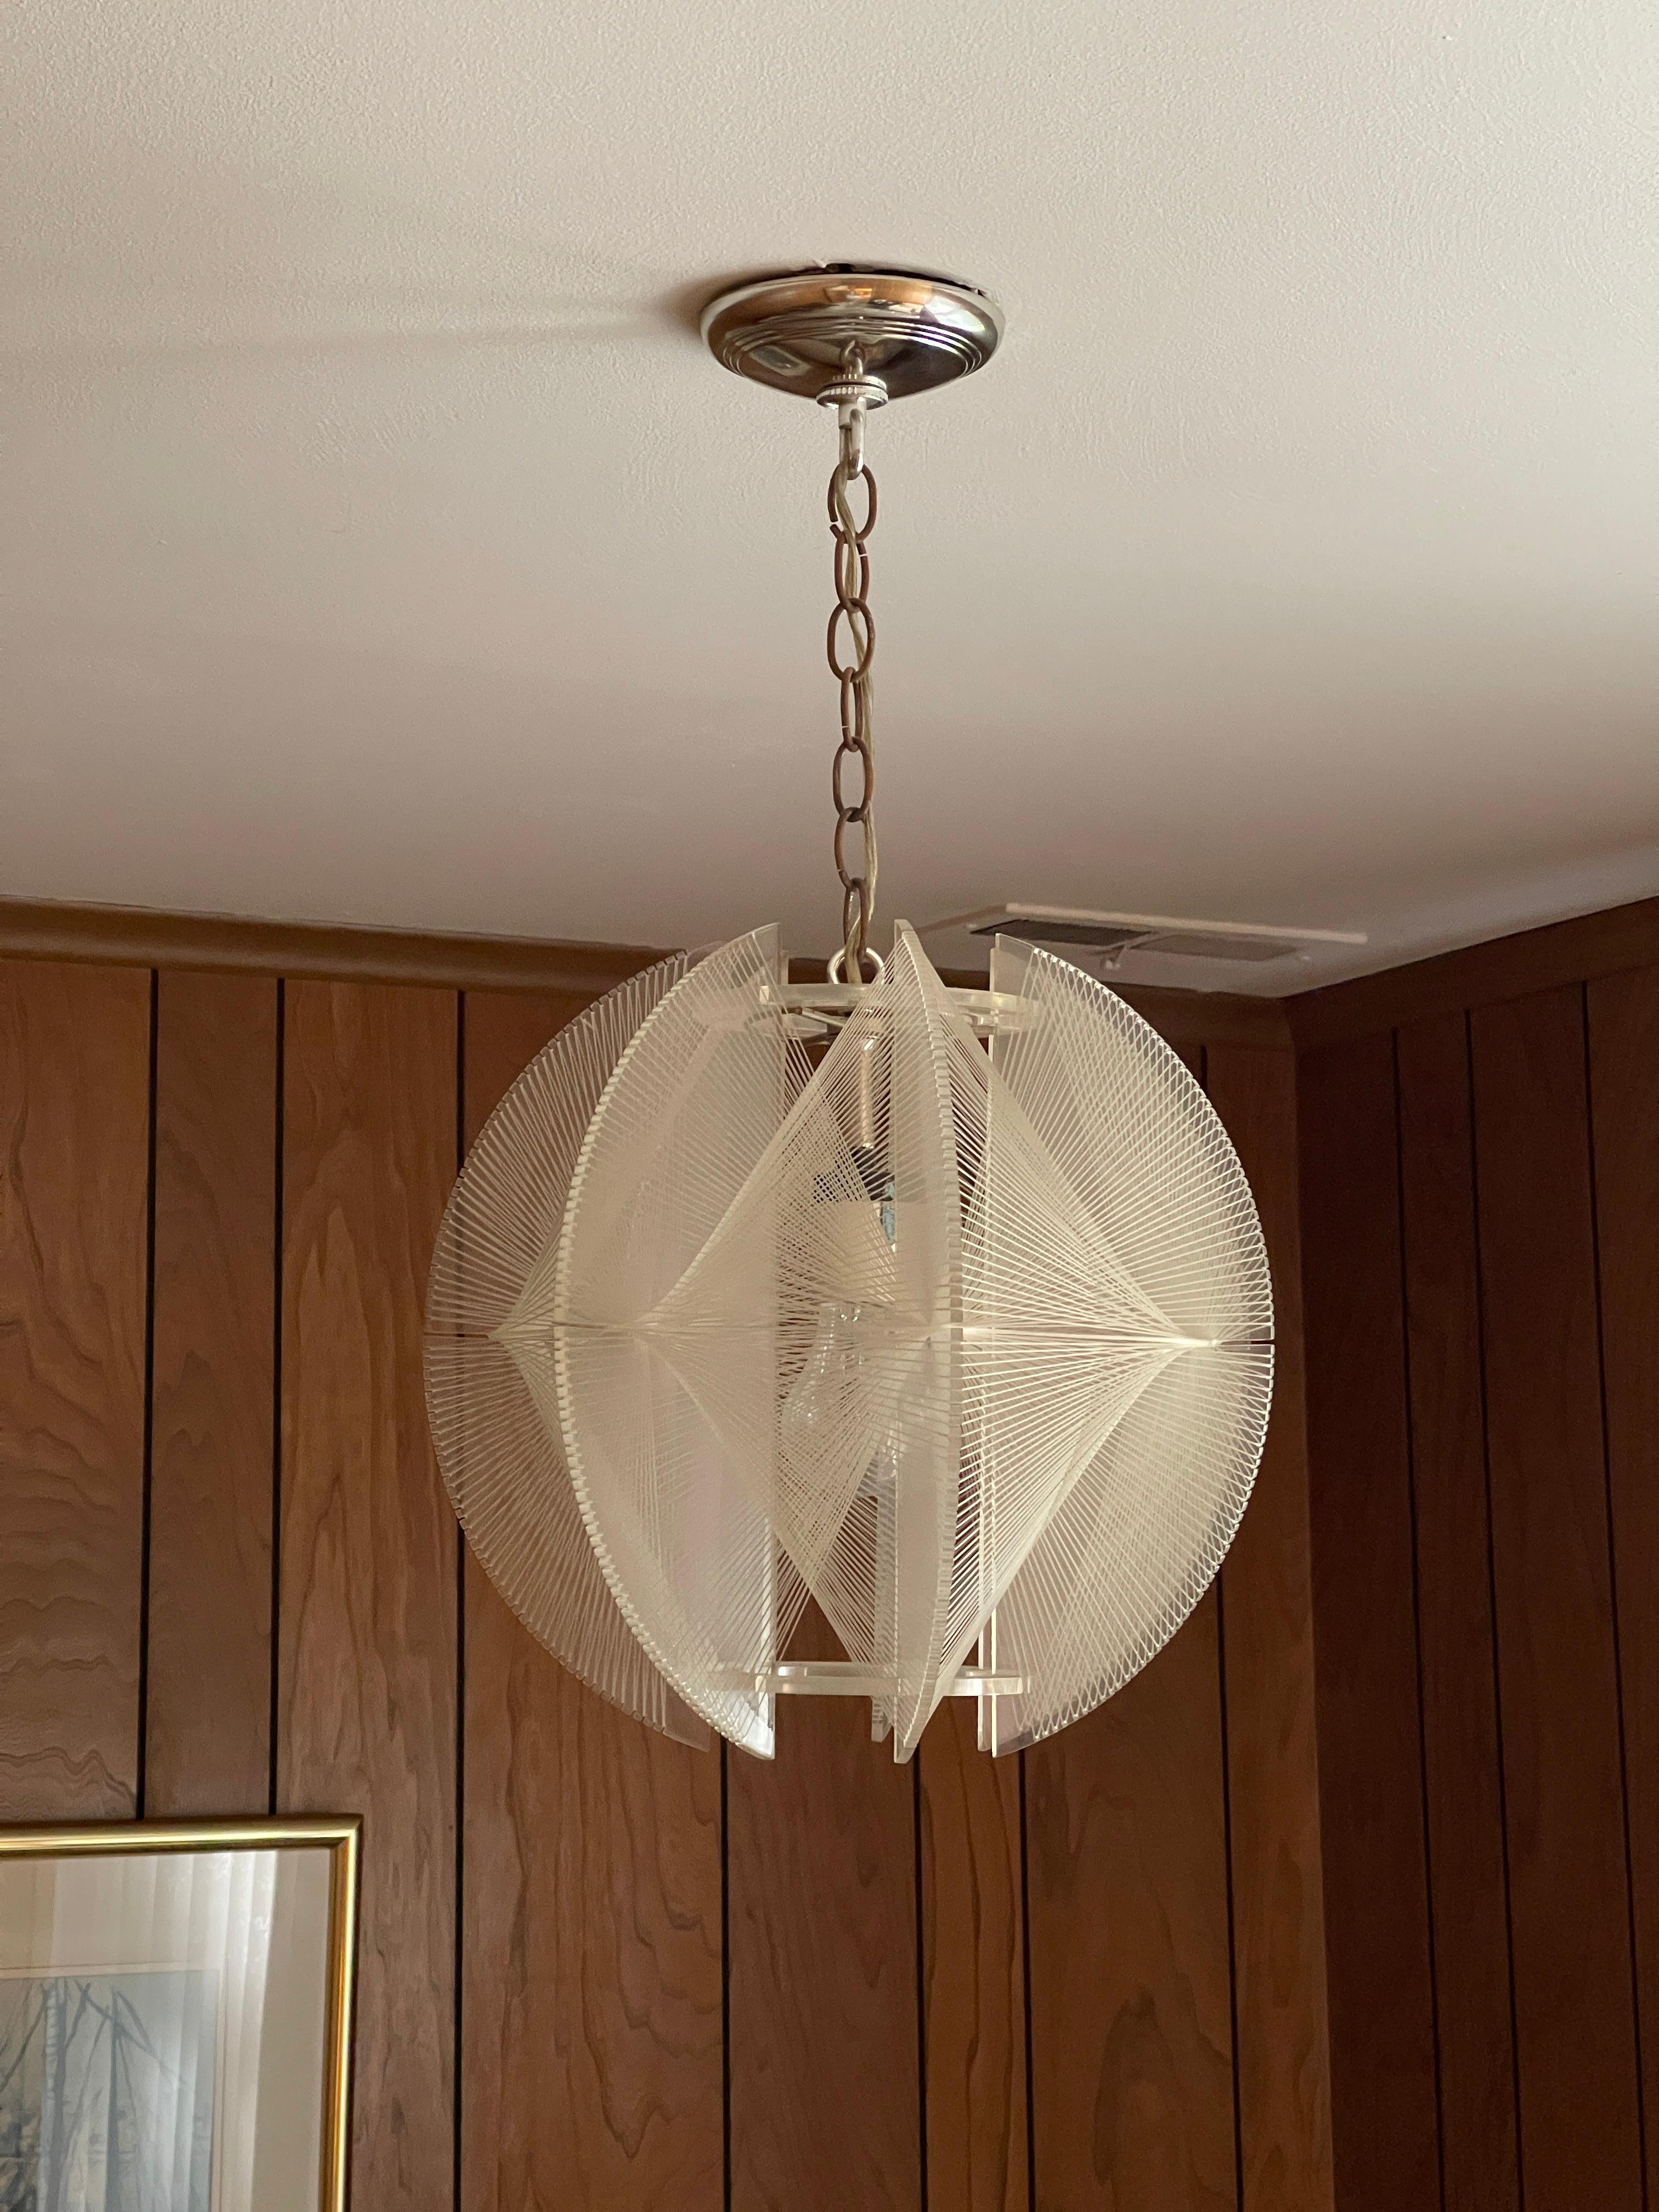 1960s ceiling lamp by Paul Secon for Sompex

A beautiful ceiling lamp from the 60s, designed for Sompex by Paul Secon. The lamp has a clear lucite frame with threaded nylon filament plus chrome fixings. A perfect use of shape and materials for a